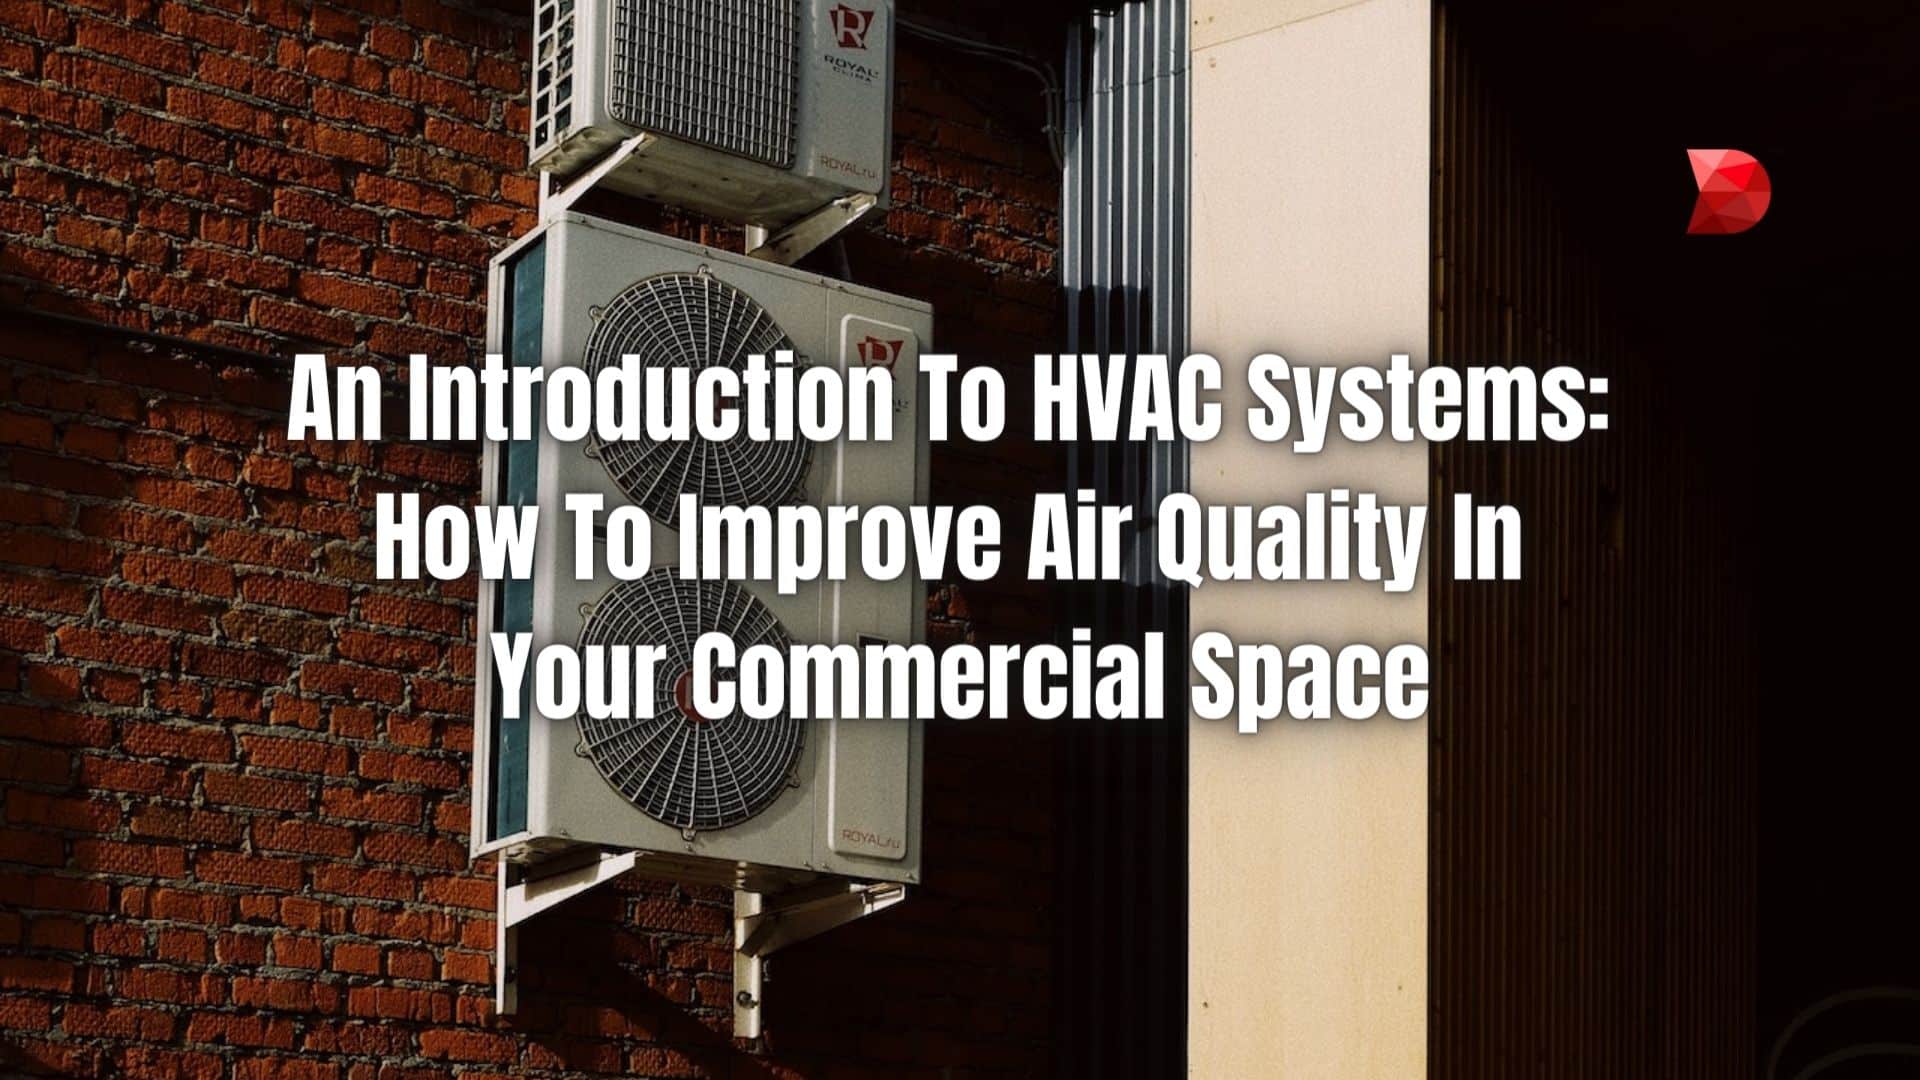 An Introduction To HVAC Systems How To Improve Air Quality In Your Commercial Space